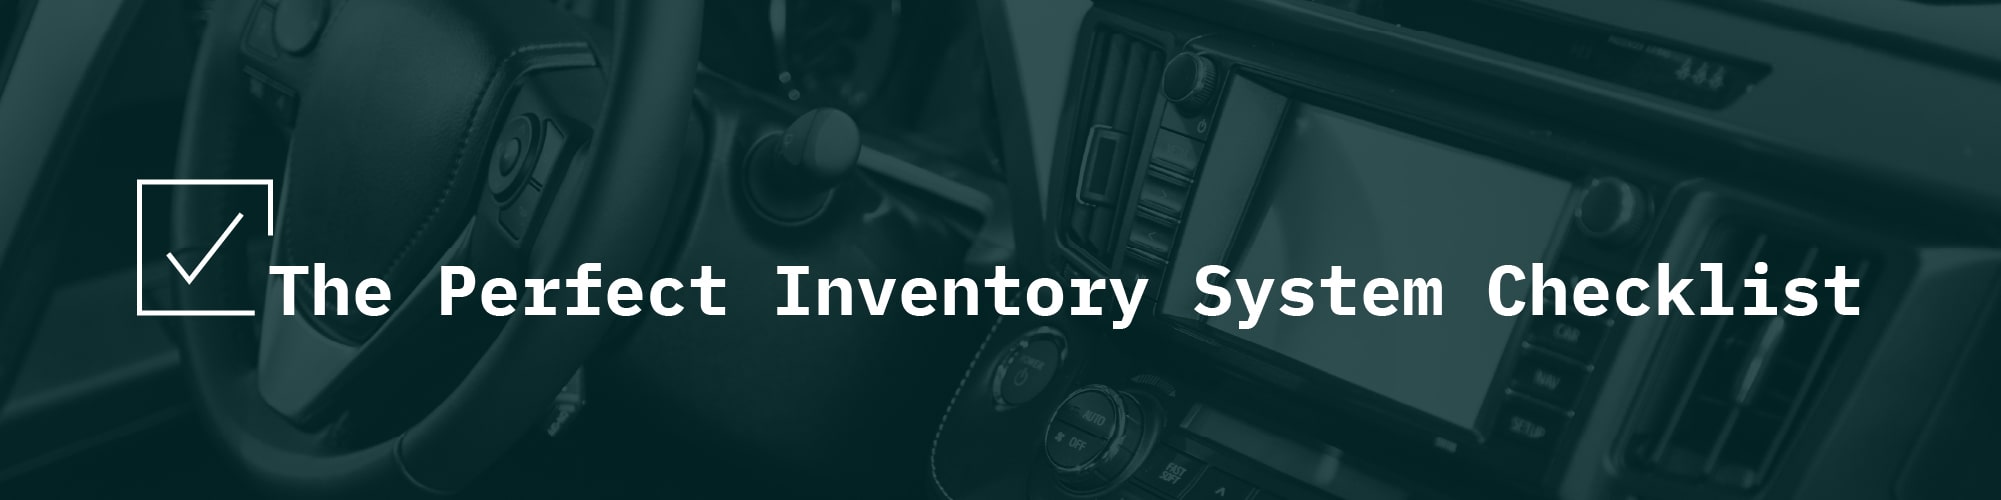 The Perfect Inventory System Checklist title image